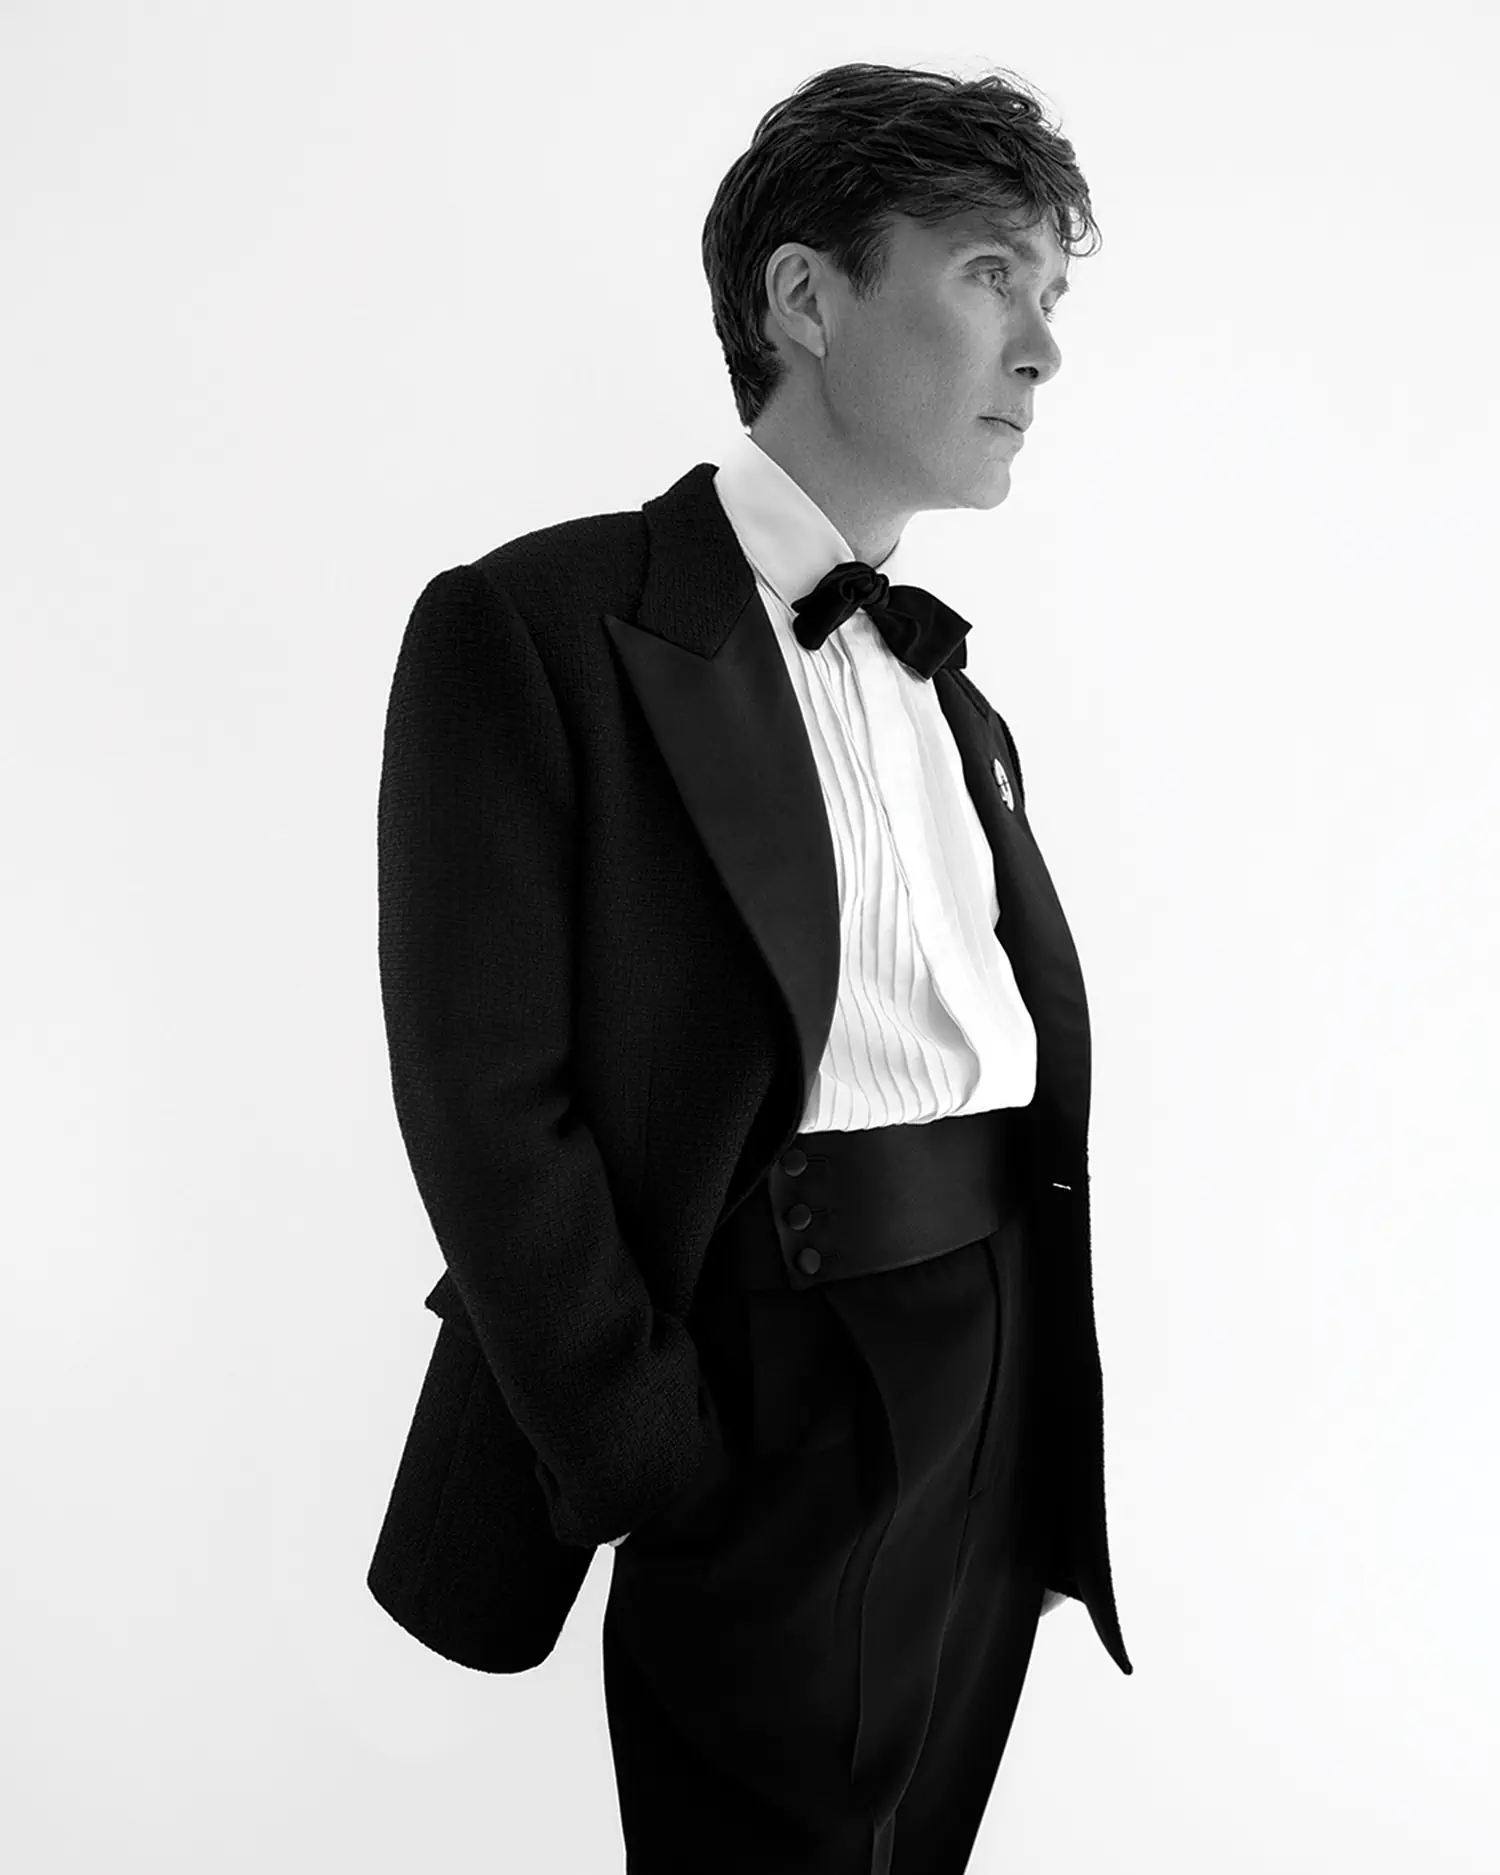 Versace selects Cillian Murphy for its 'Icon' campaign